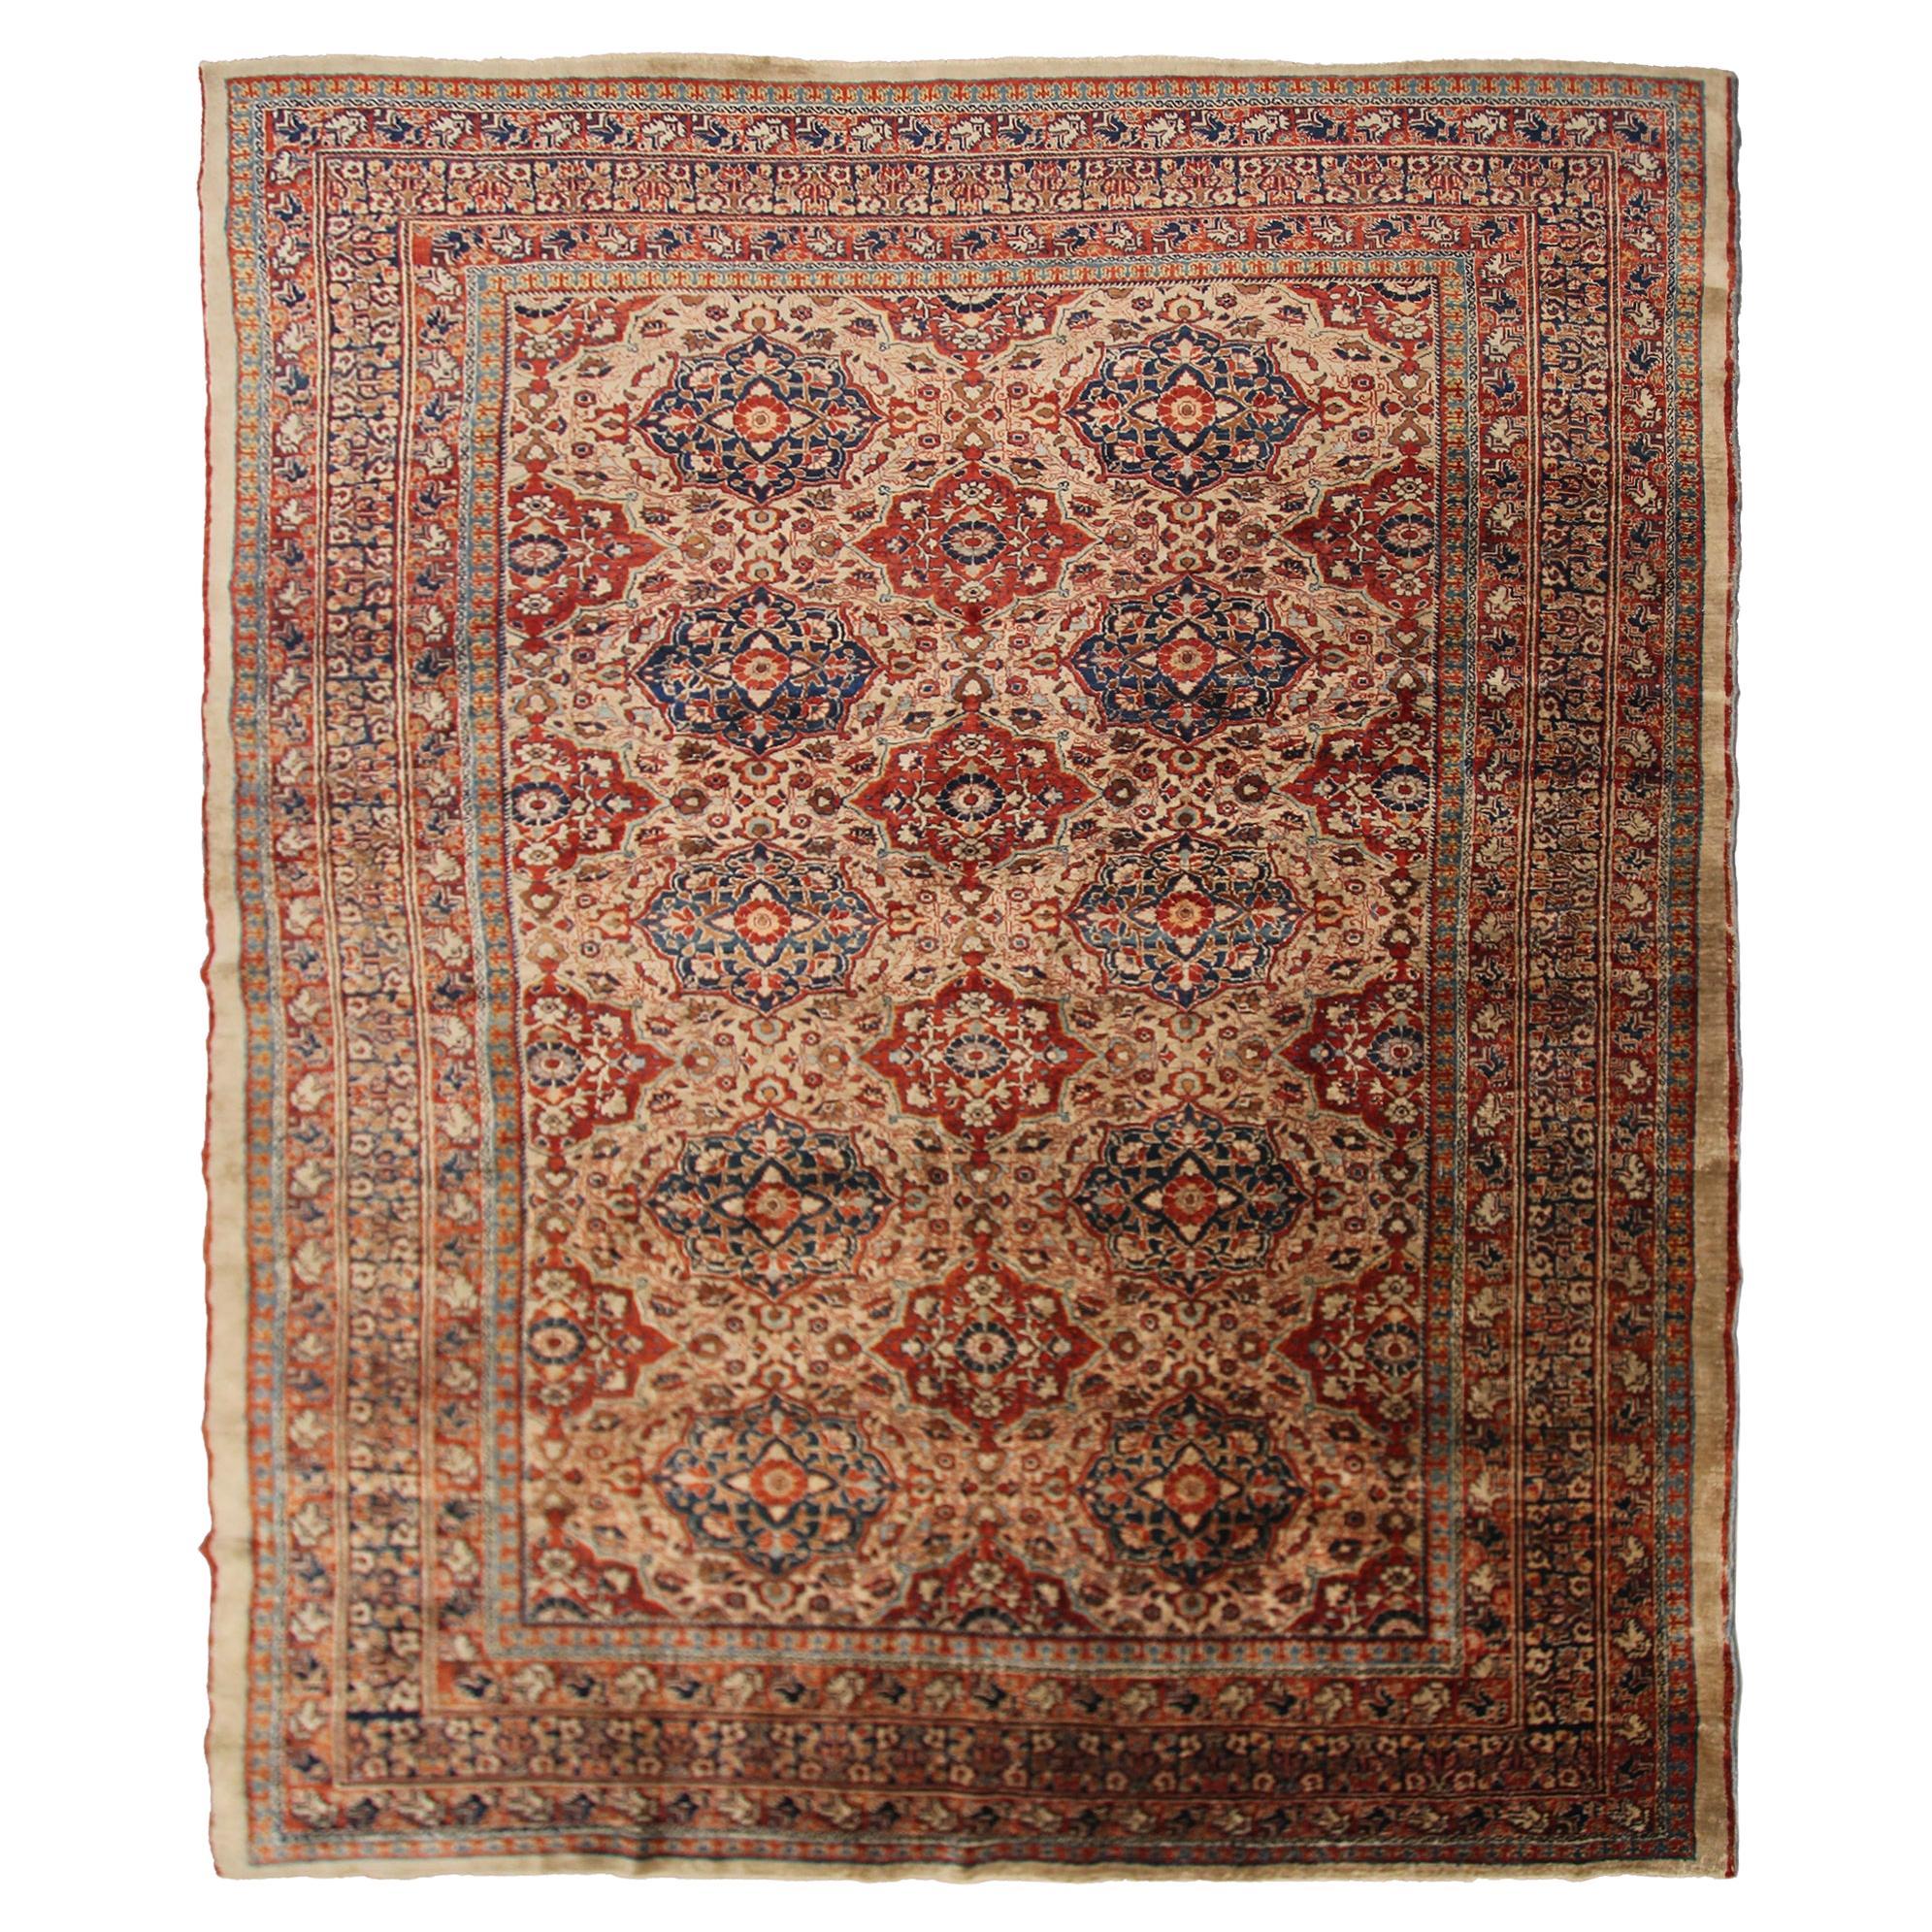 Mid 1800's Rare Antique Silk Heriz Rug Masterpiece 5x6 Tapestry 1860 For Sale